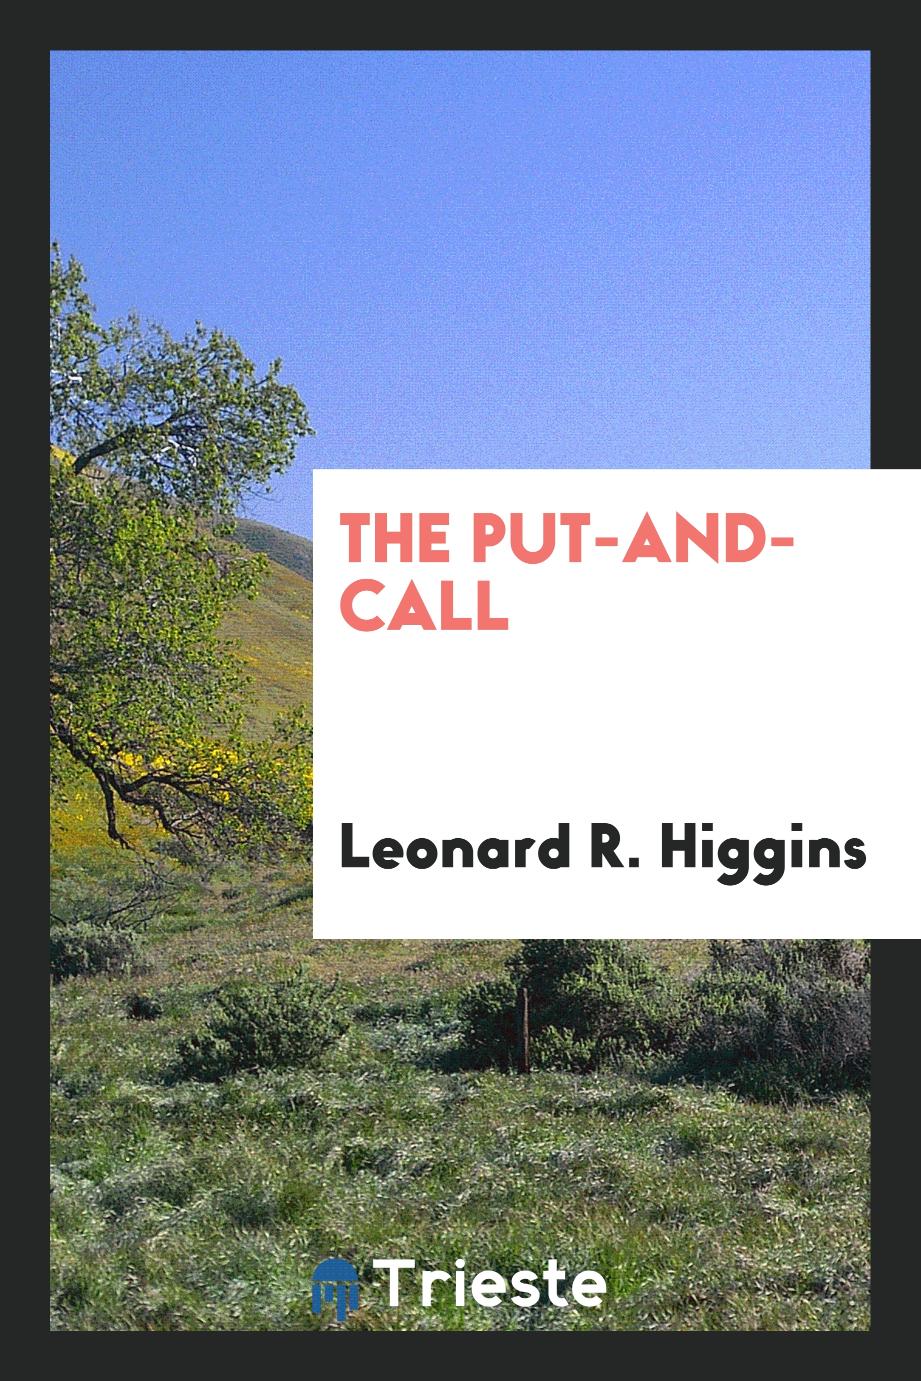 The Put-and-call